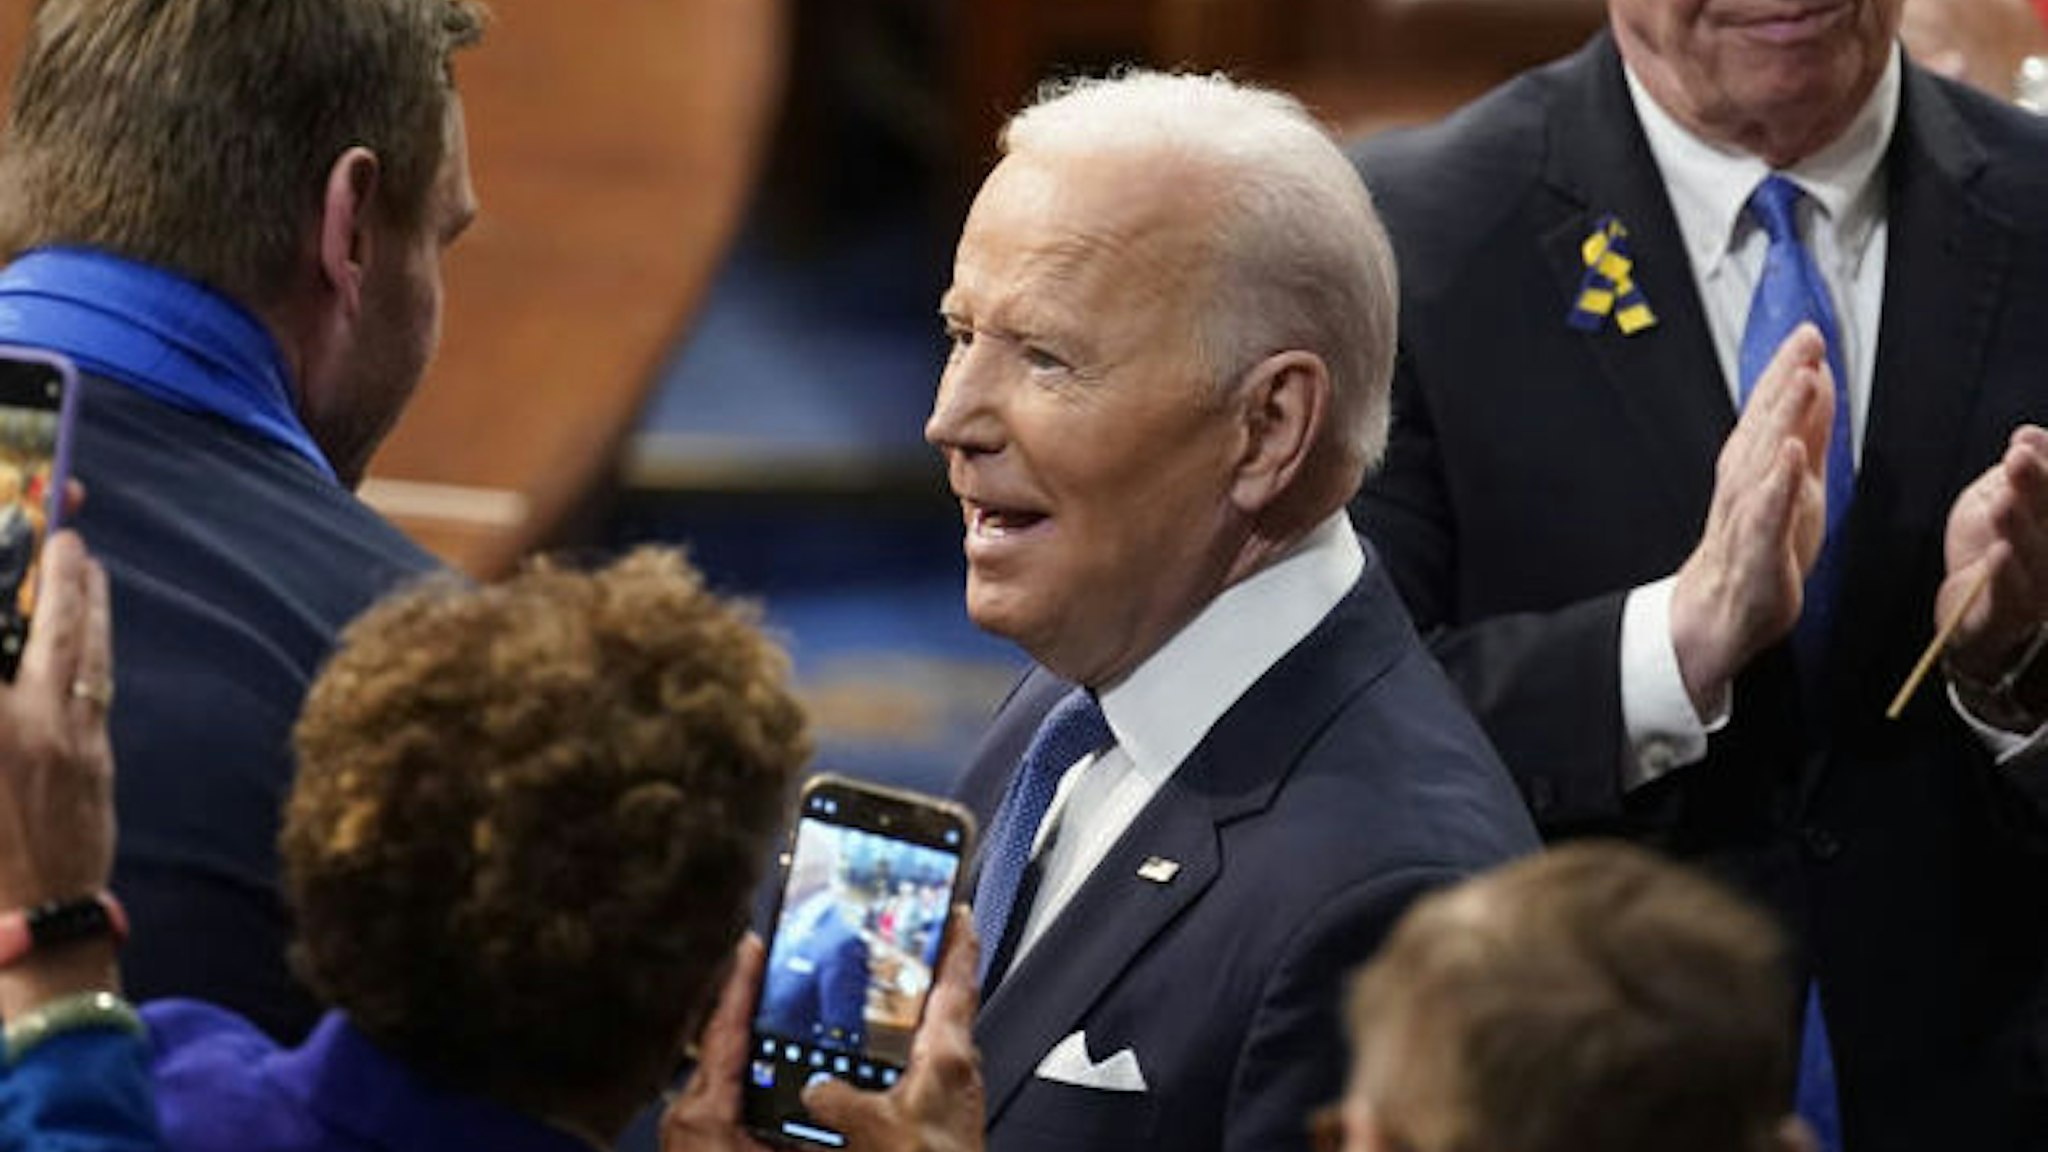 .S. President Joe Biden, center, arrives to deliver a State of the Union address at the U.S. Capitol in Washington, D.C., U.S., on Tuesday, March 1, 2022.